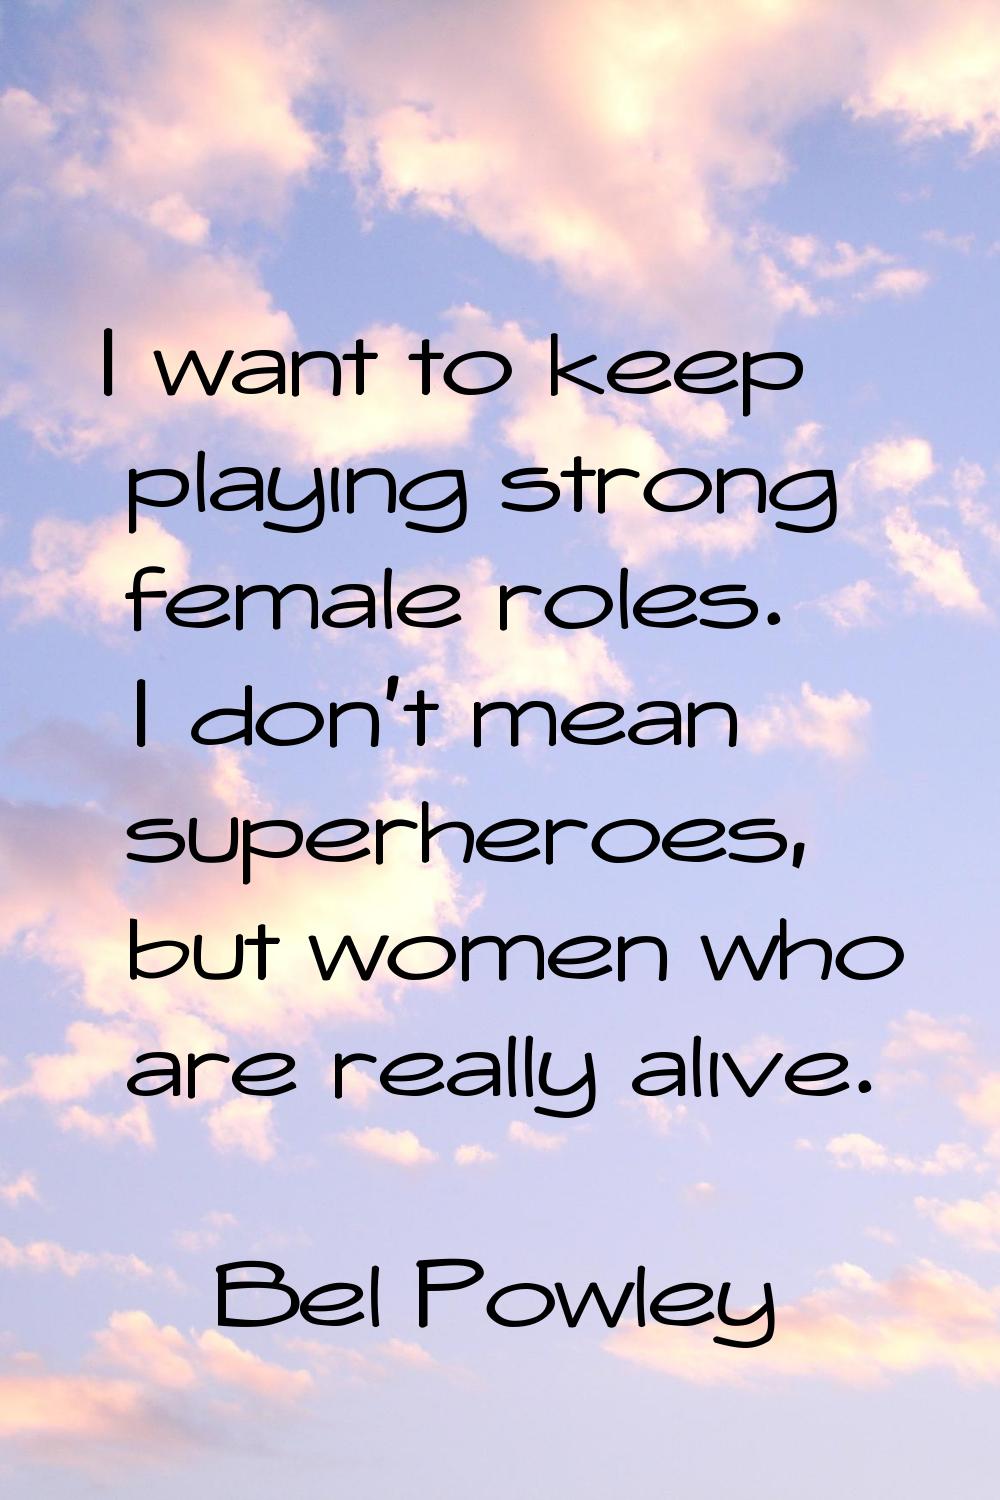 I want to keep playing strong female roles. I don't mean superheroes, but women who are really aliv